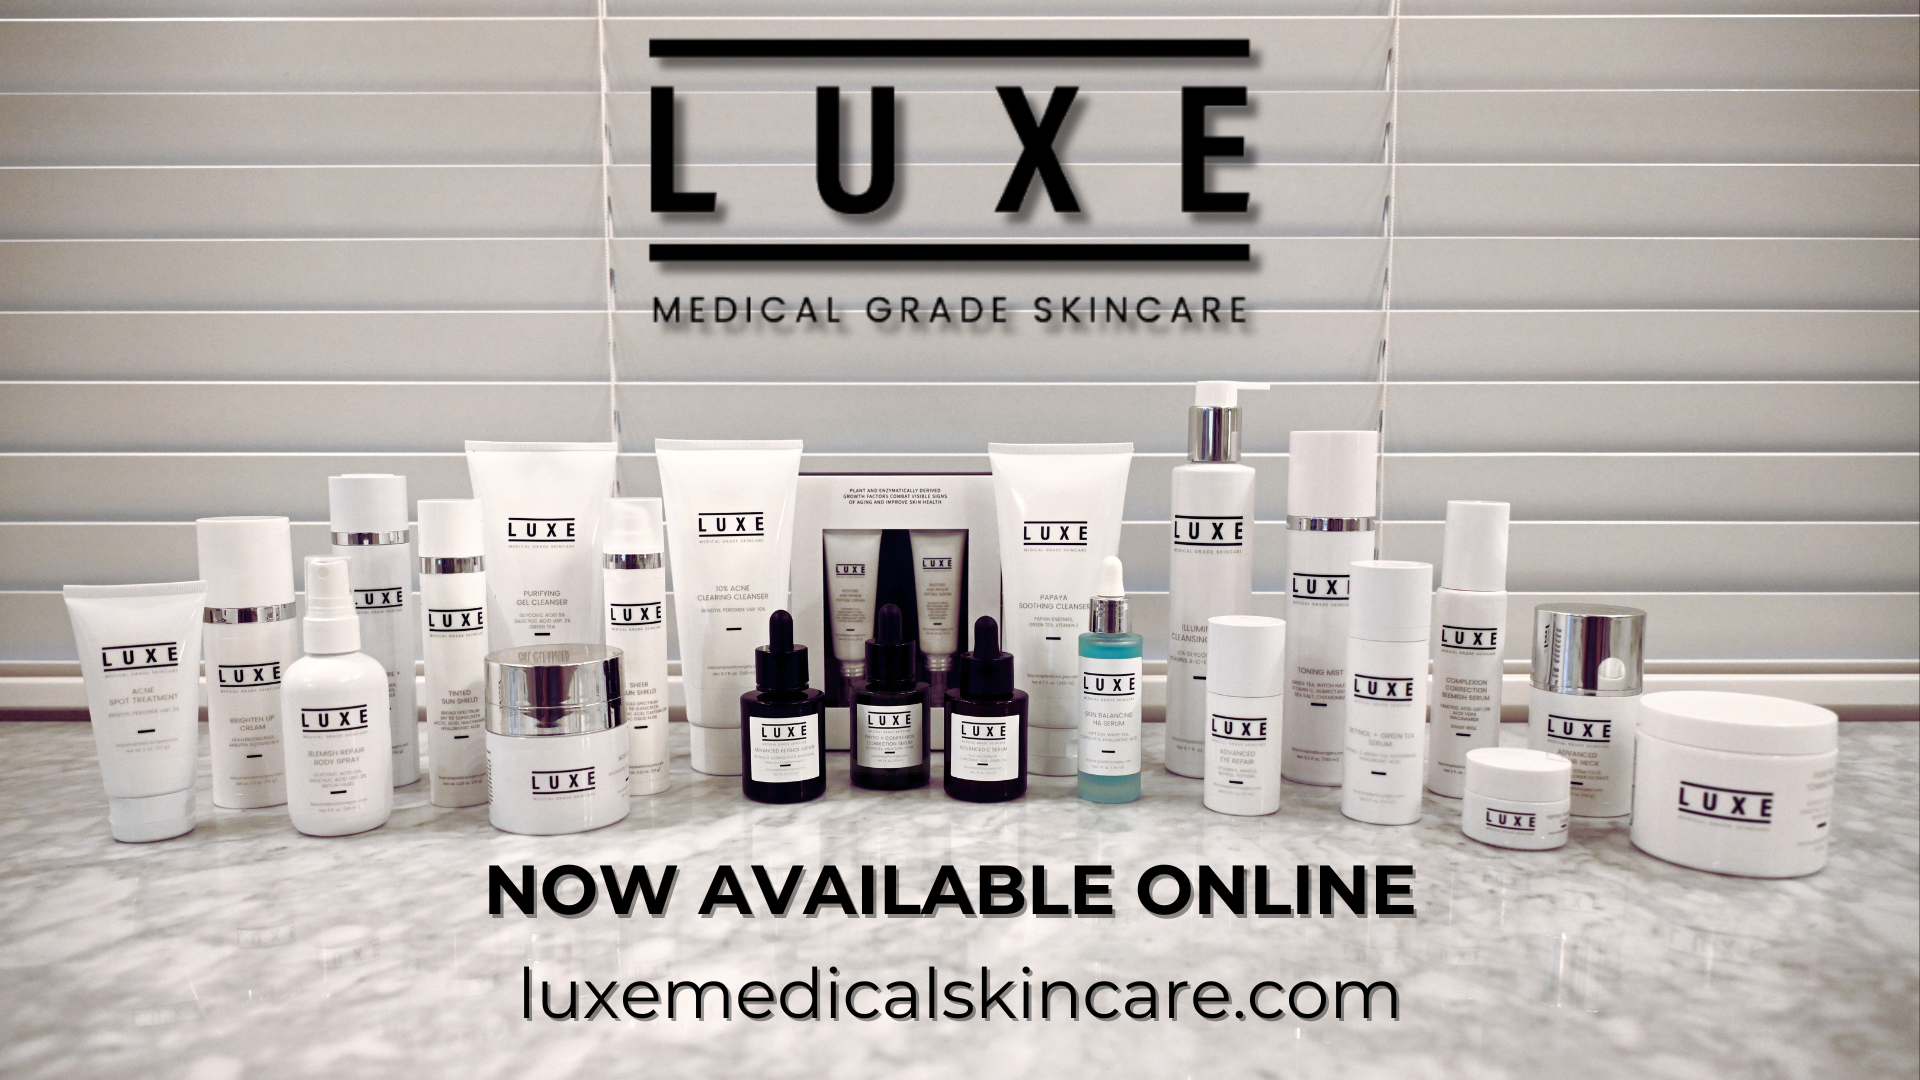 Introducing The Luxe Online Store!